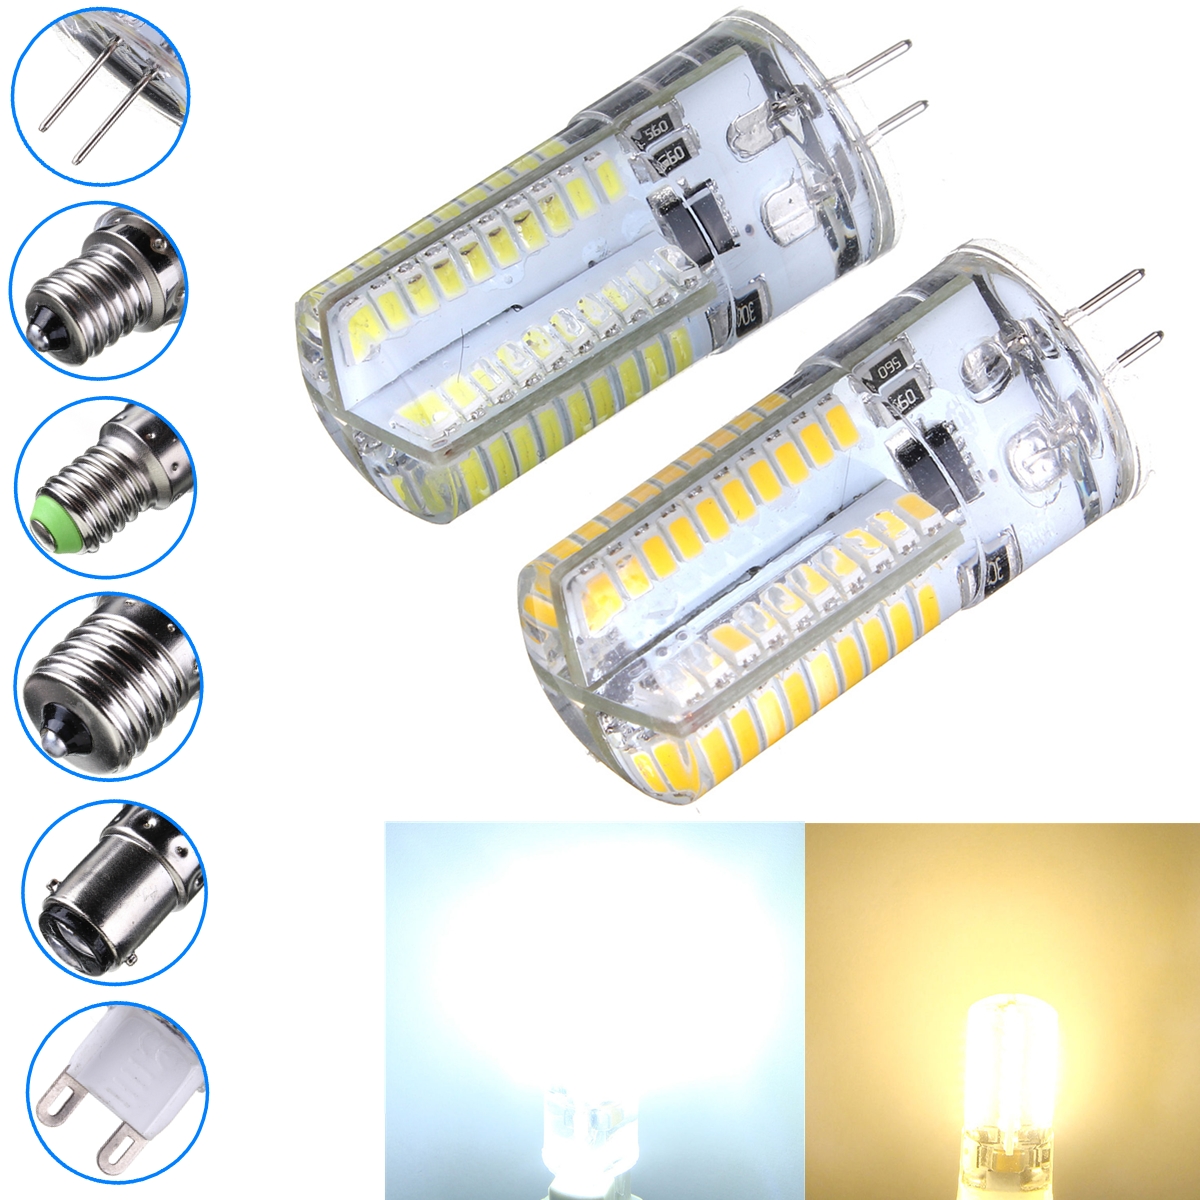 110-120V-3W-80LED-3014-SMD-E12-LED-Dimmable-Silicone-Crystal-Bulb-964373-1